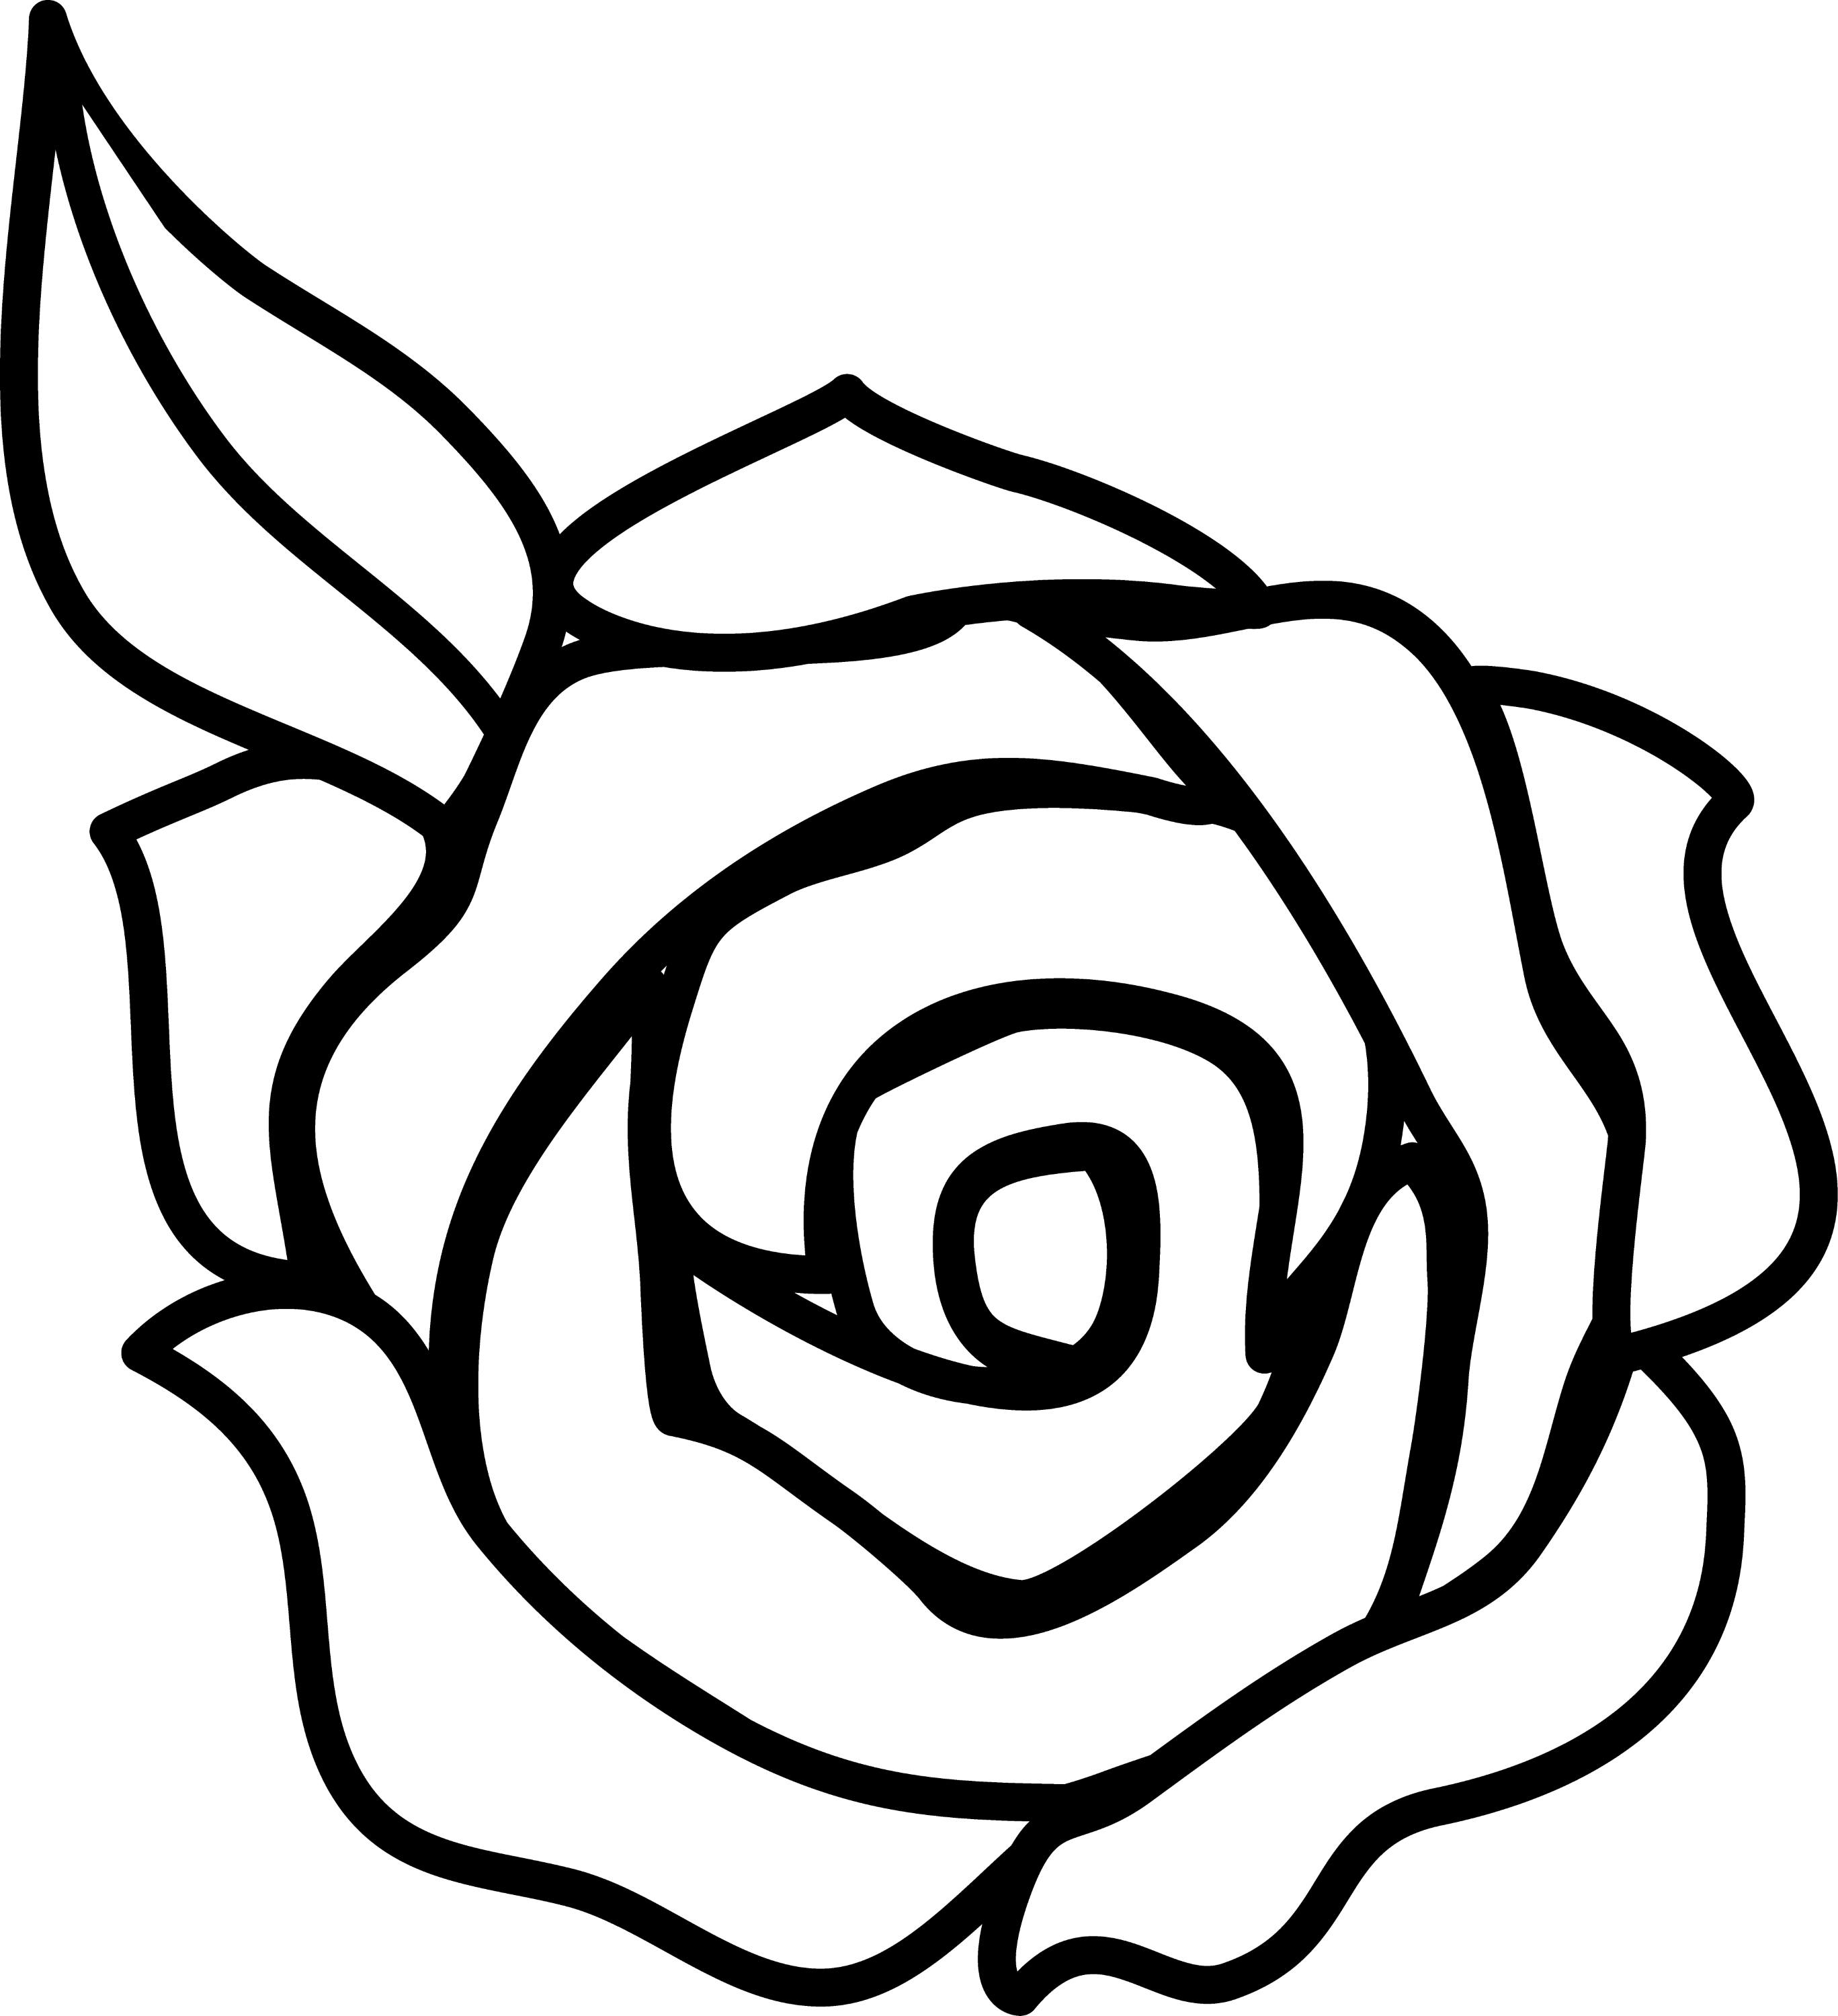 free rose clipart black and white - photo #2